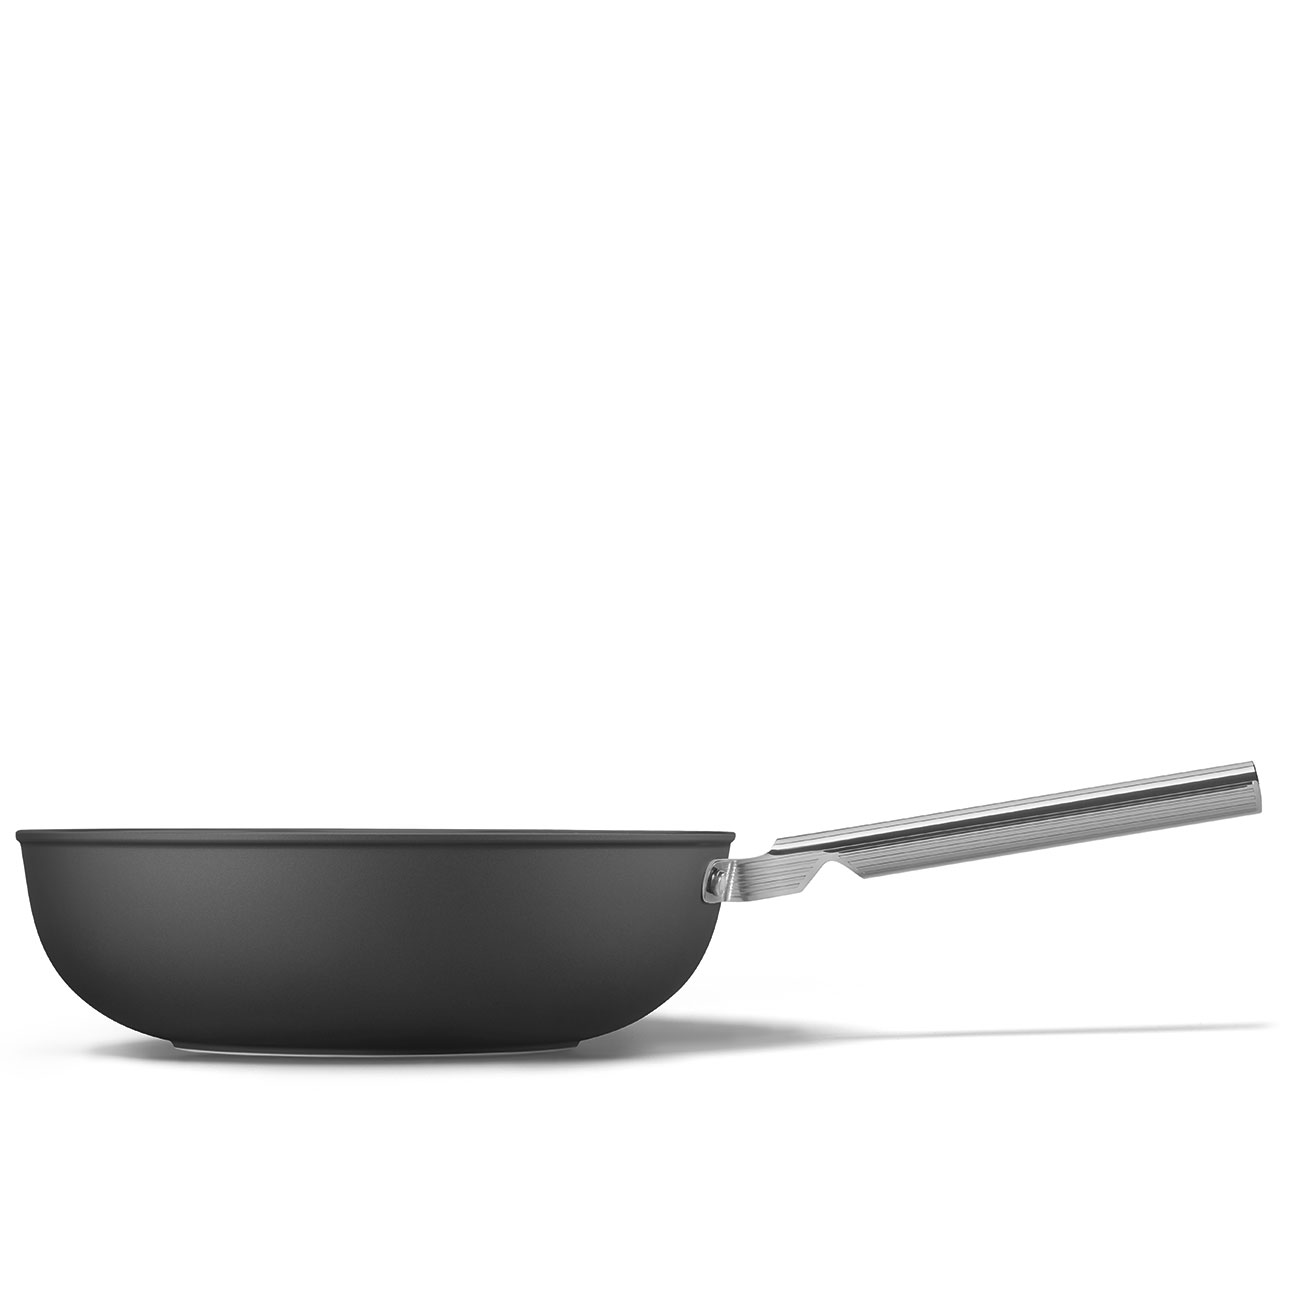 Smeg Black Non-stick Wok with Stainless Steel Handle - CKFW3001BLM_1